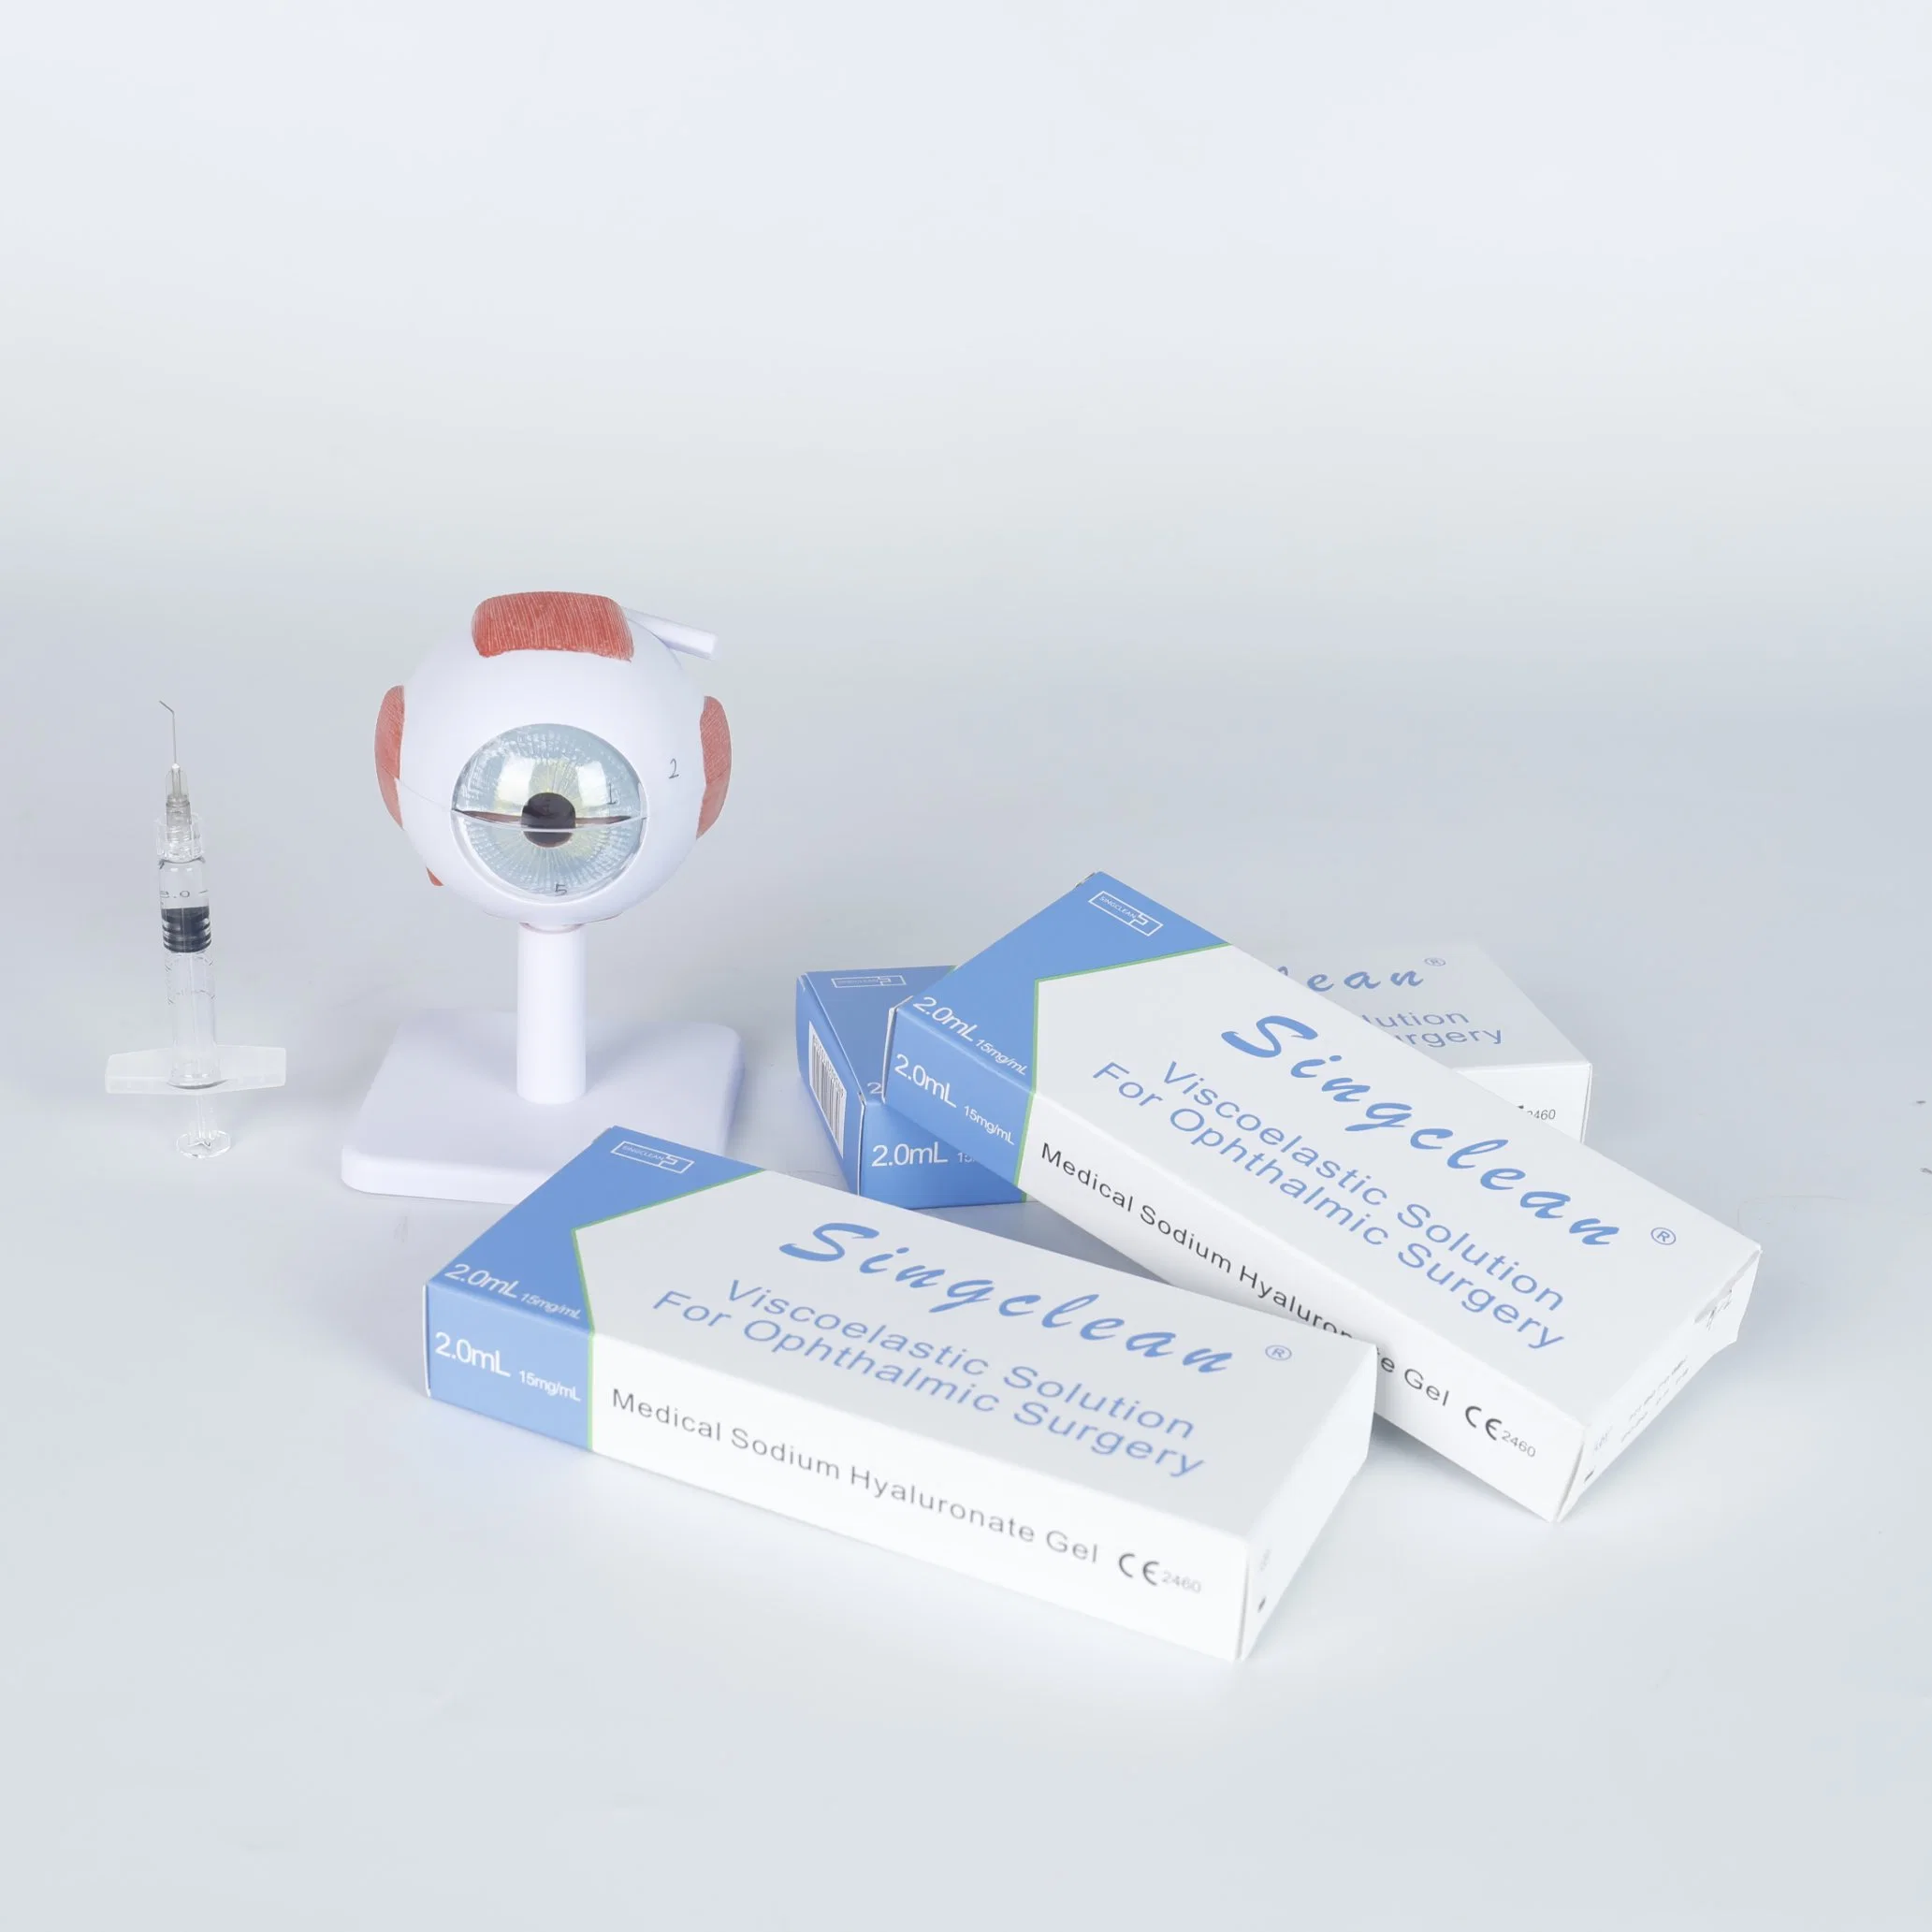 Singclean High Viscoelastic Solution for Corneal Endothelial Cell Protection in Eye/Ophthalmic Surgery